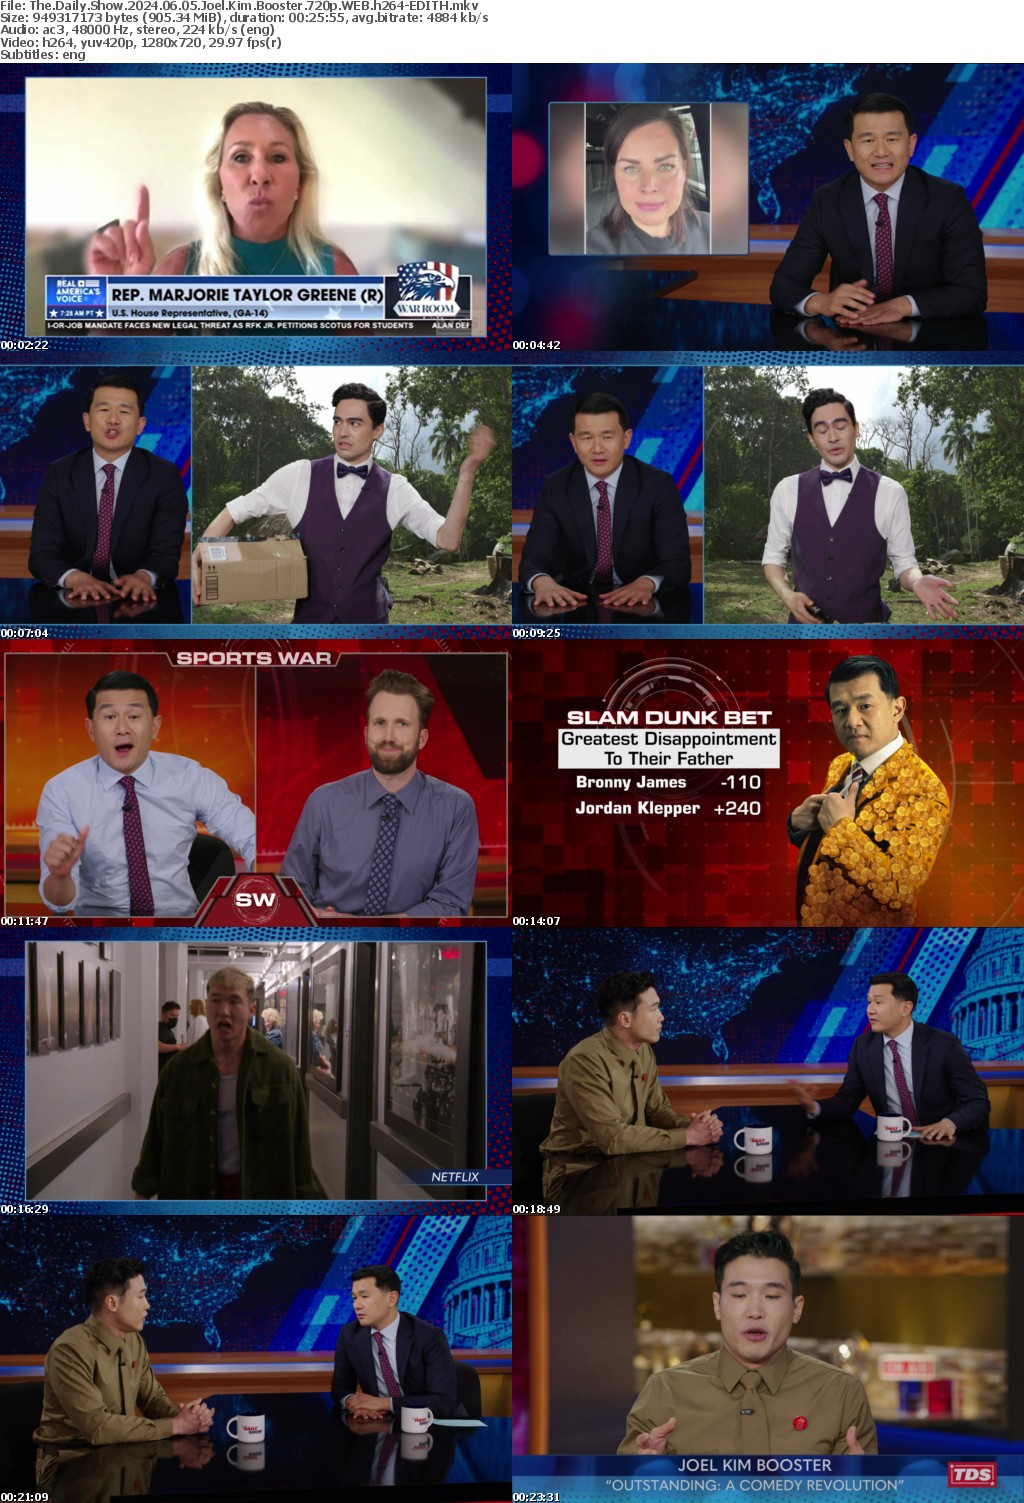 The Daily Show 2024 06 05 Joel Kim Booster 720p WEB h264-EDITH